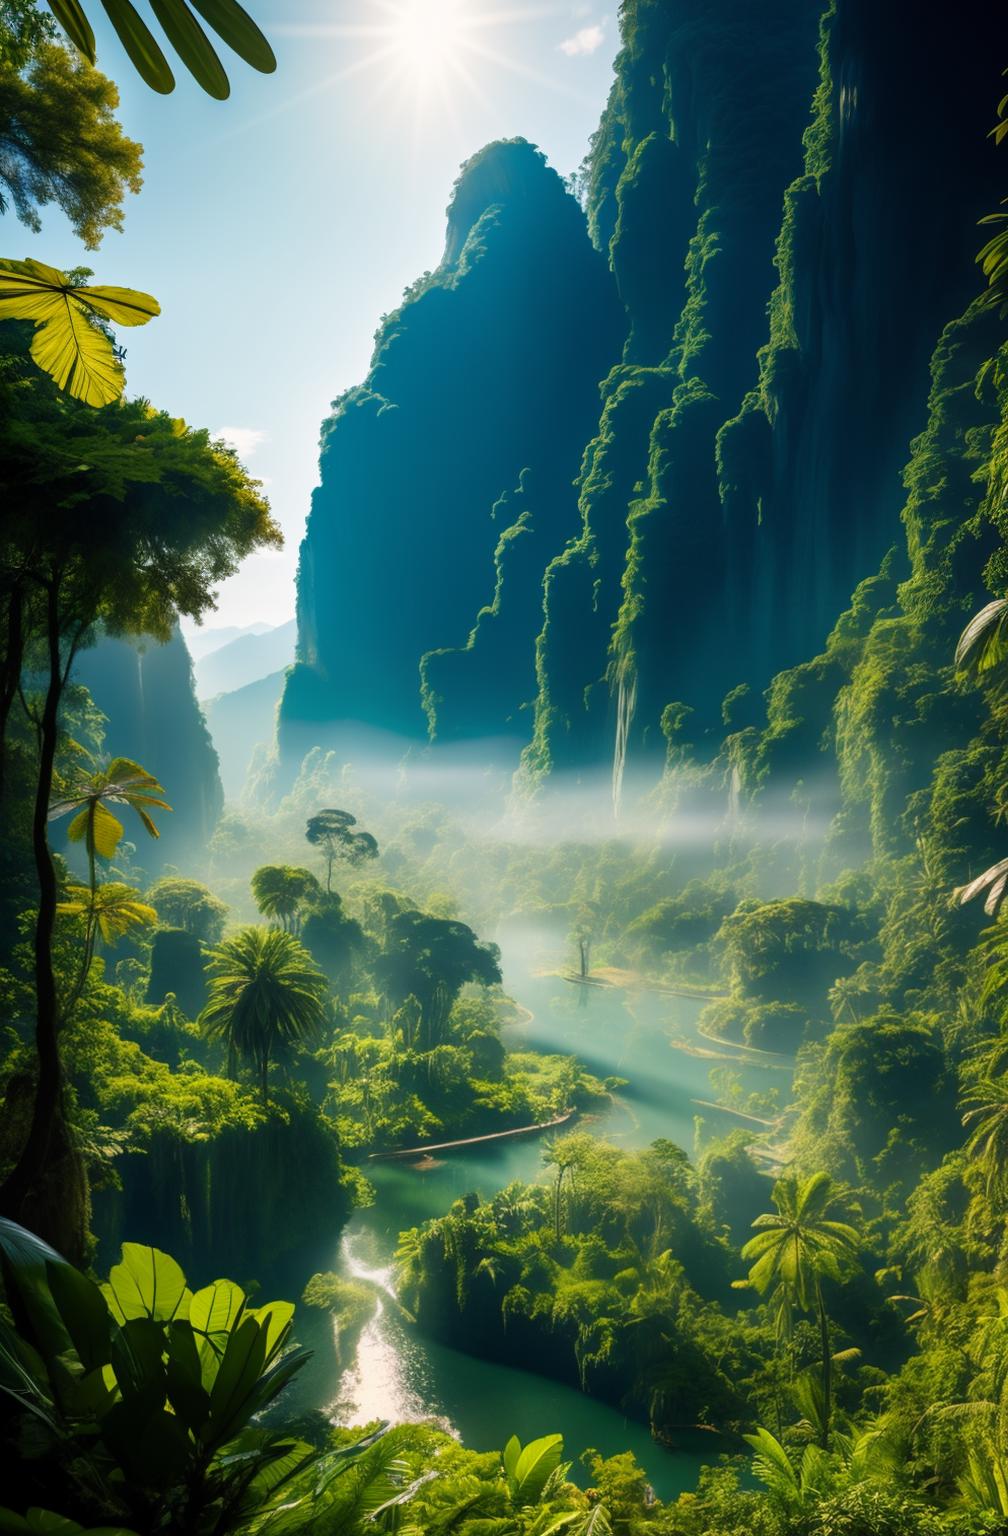 A lush green forest with a river running through it and a misty mountain in the background.